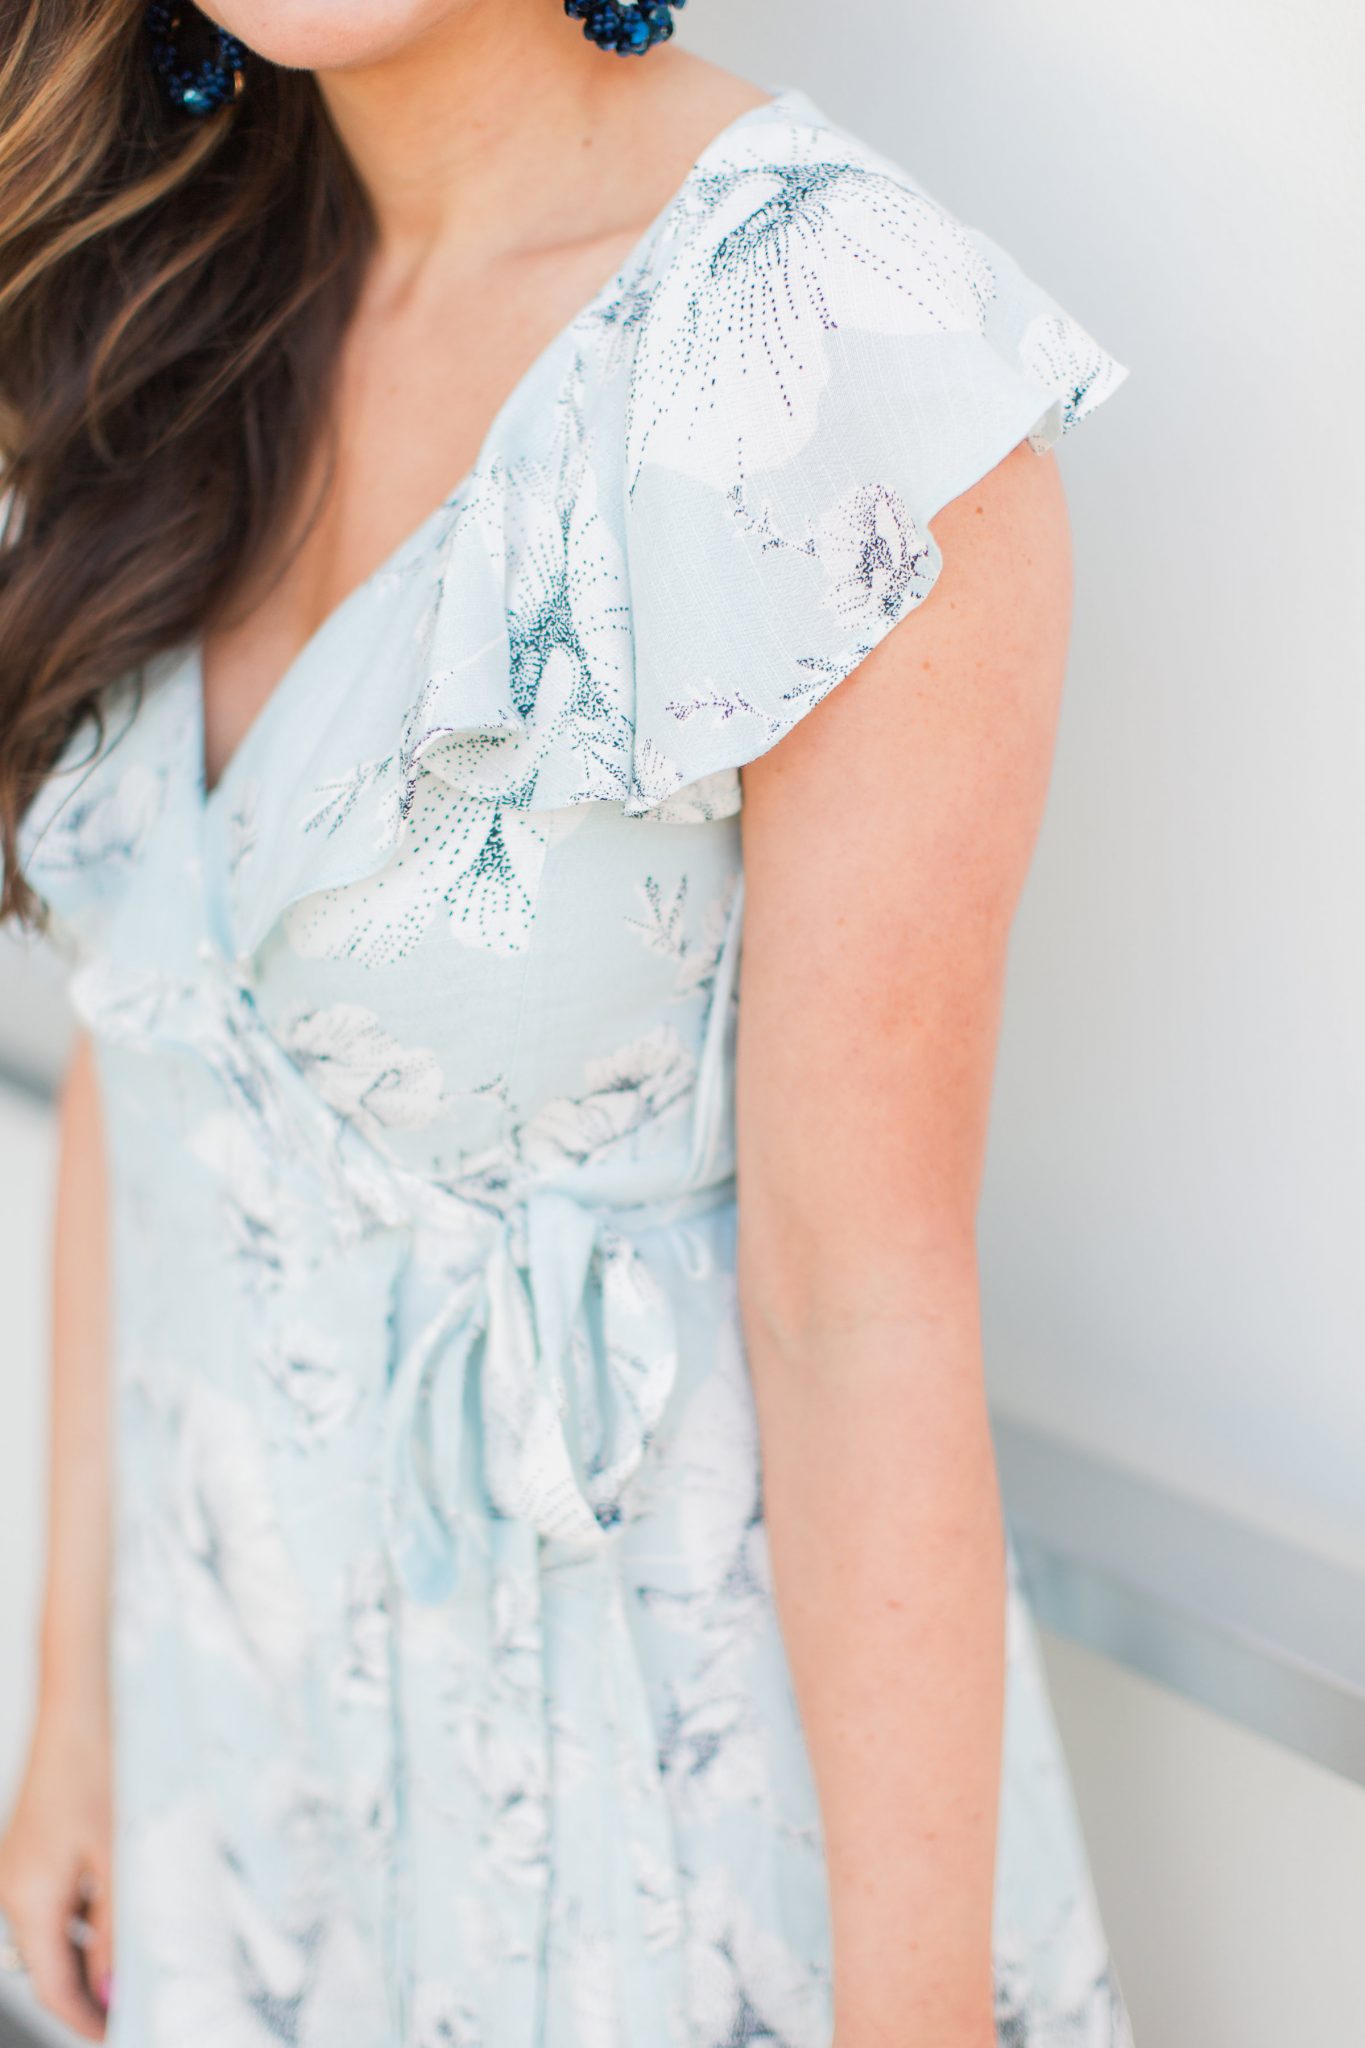 Floral wrap dress with flutter sleeve - My Favorite Cute Easter Dresses by popular Orange County fashion blogger Maxie Elise